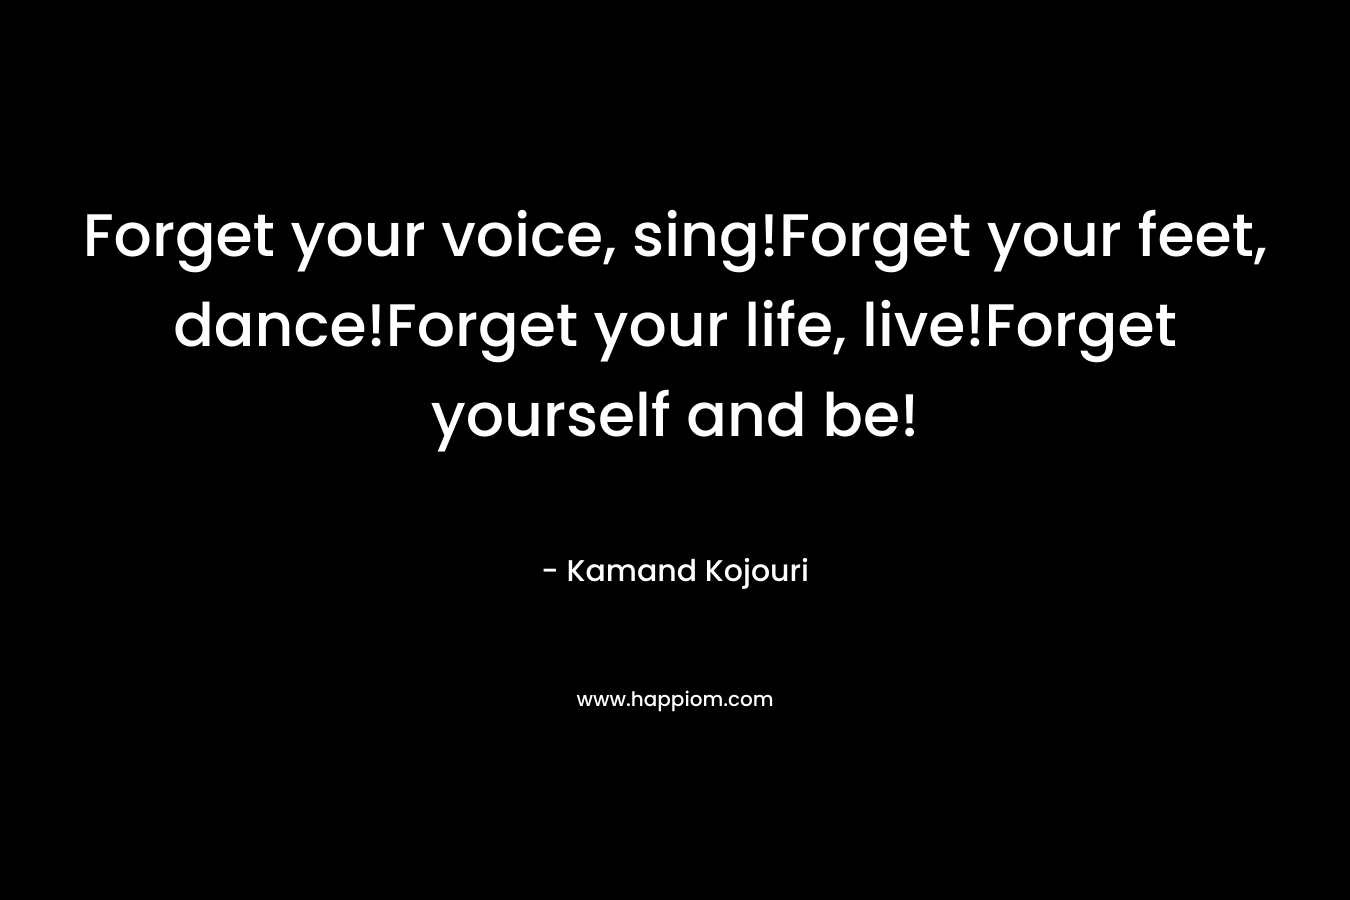 Forget your voice, sing!Forget your feet, dance!Forget your life, live!Forget yourself and be! – Kamand Kojouri